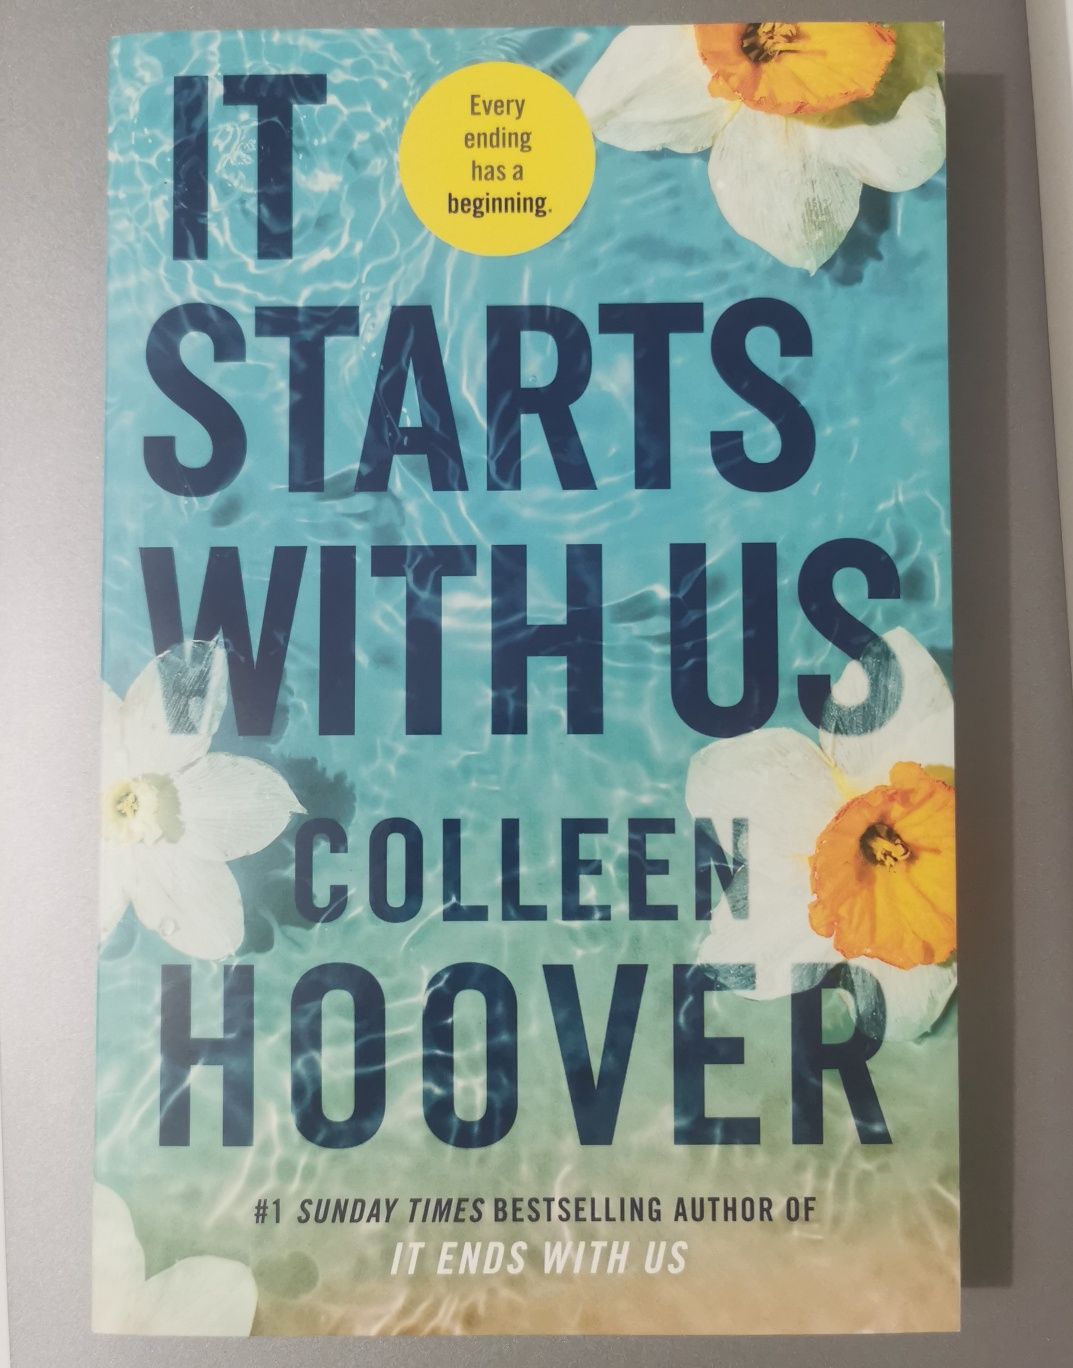 Książka Colleen Hoover "It Starts With Us"